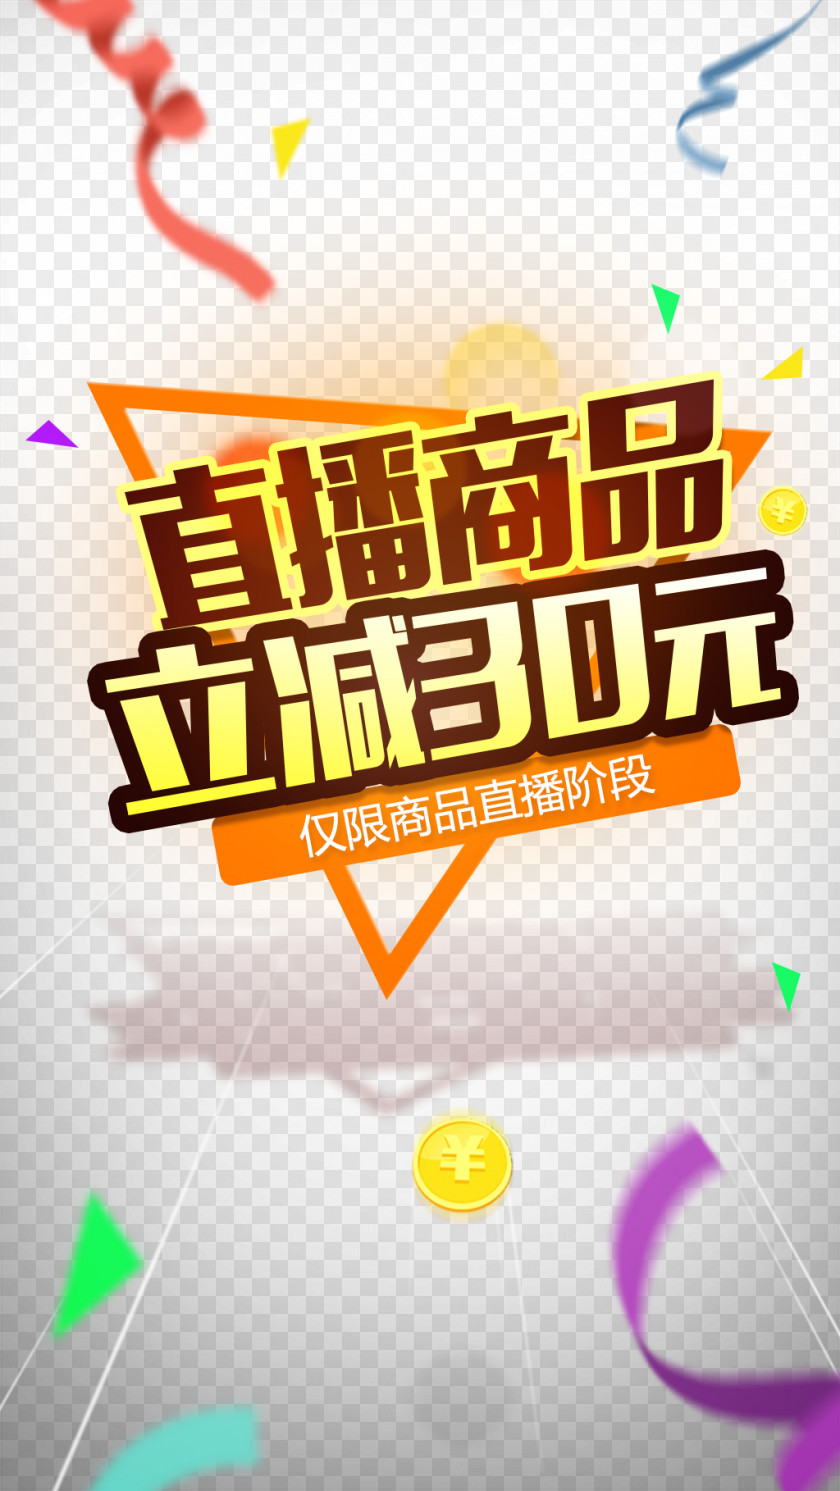 APP Boot Enlarge Lynx Taobao Promotional Posters, Minus Events Goods Poster PNG